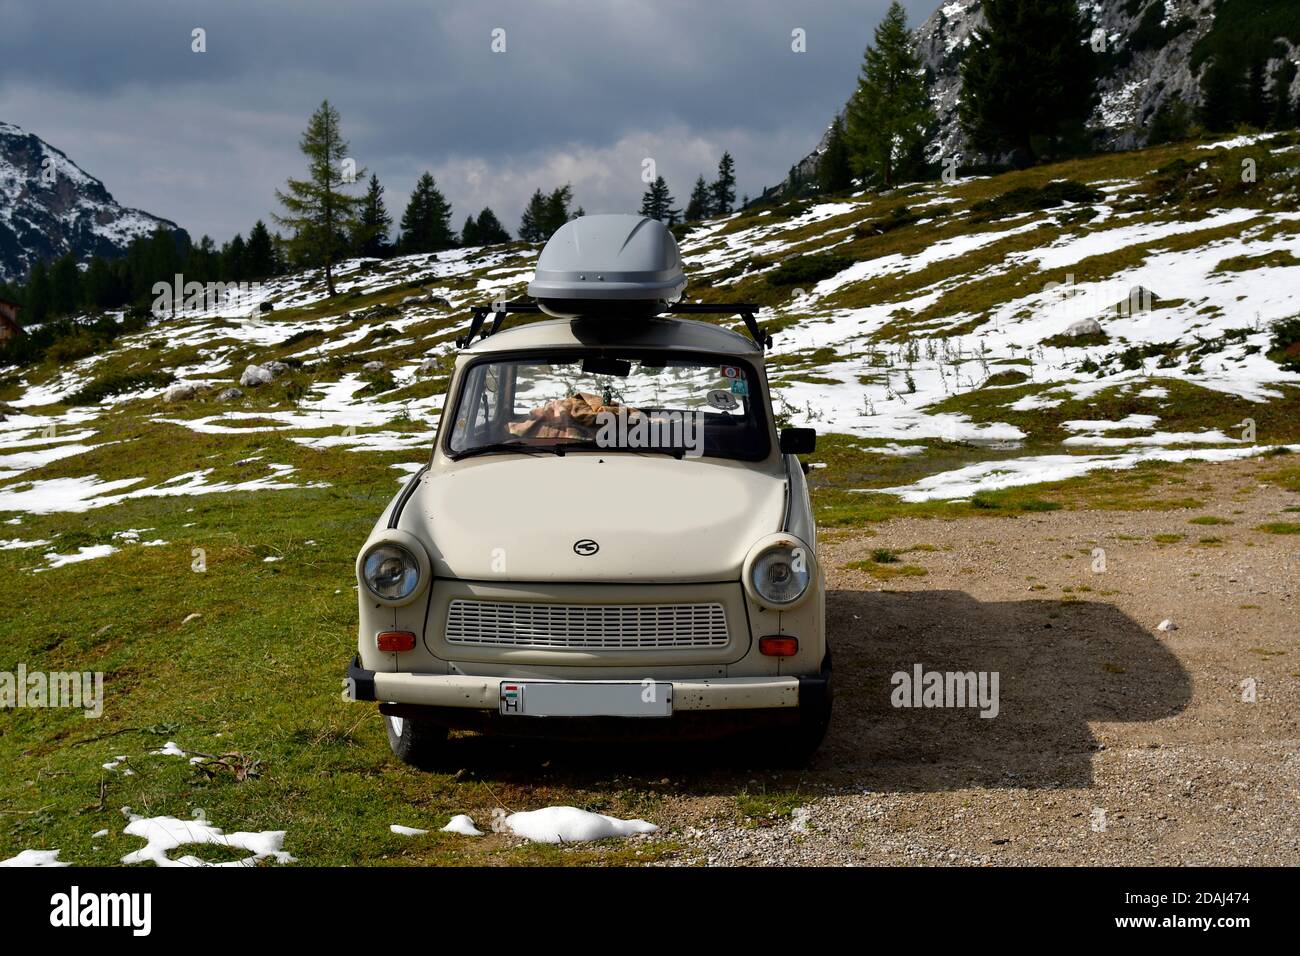 Tauplitz, Austria - September 24, 2017: Vintage car Trabant 601 the nickname was Trabi produced in former Democratic Republic of Germany aka East Germ Stock Photo